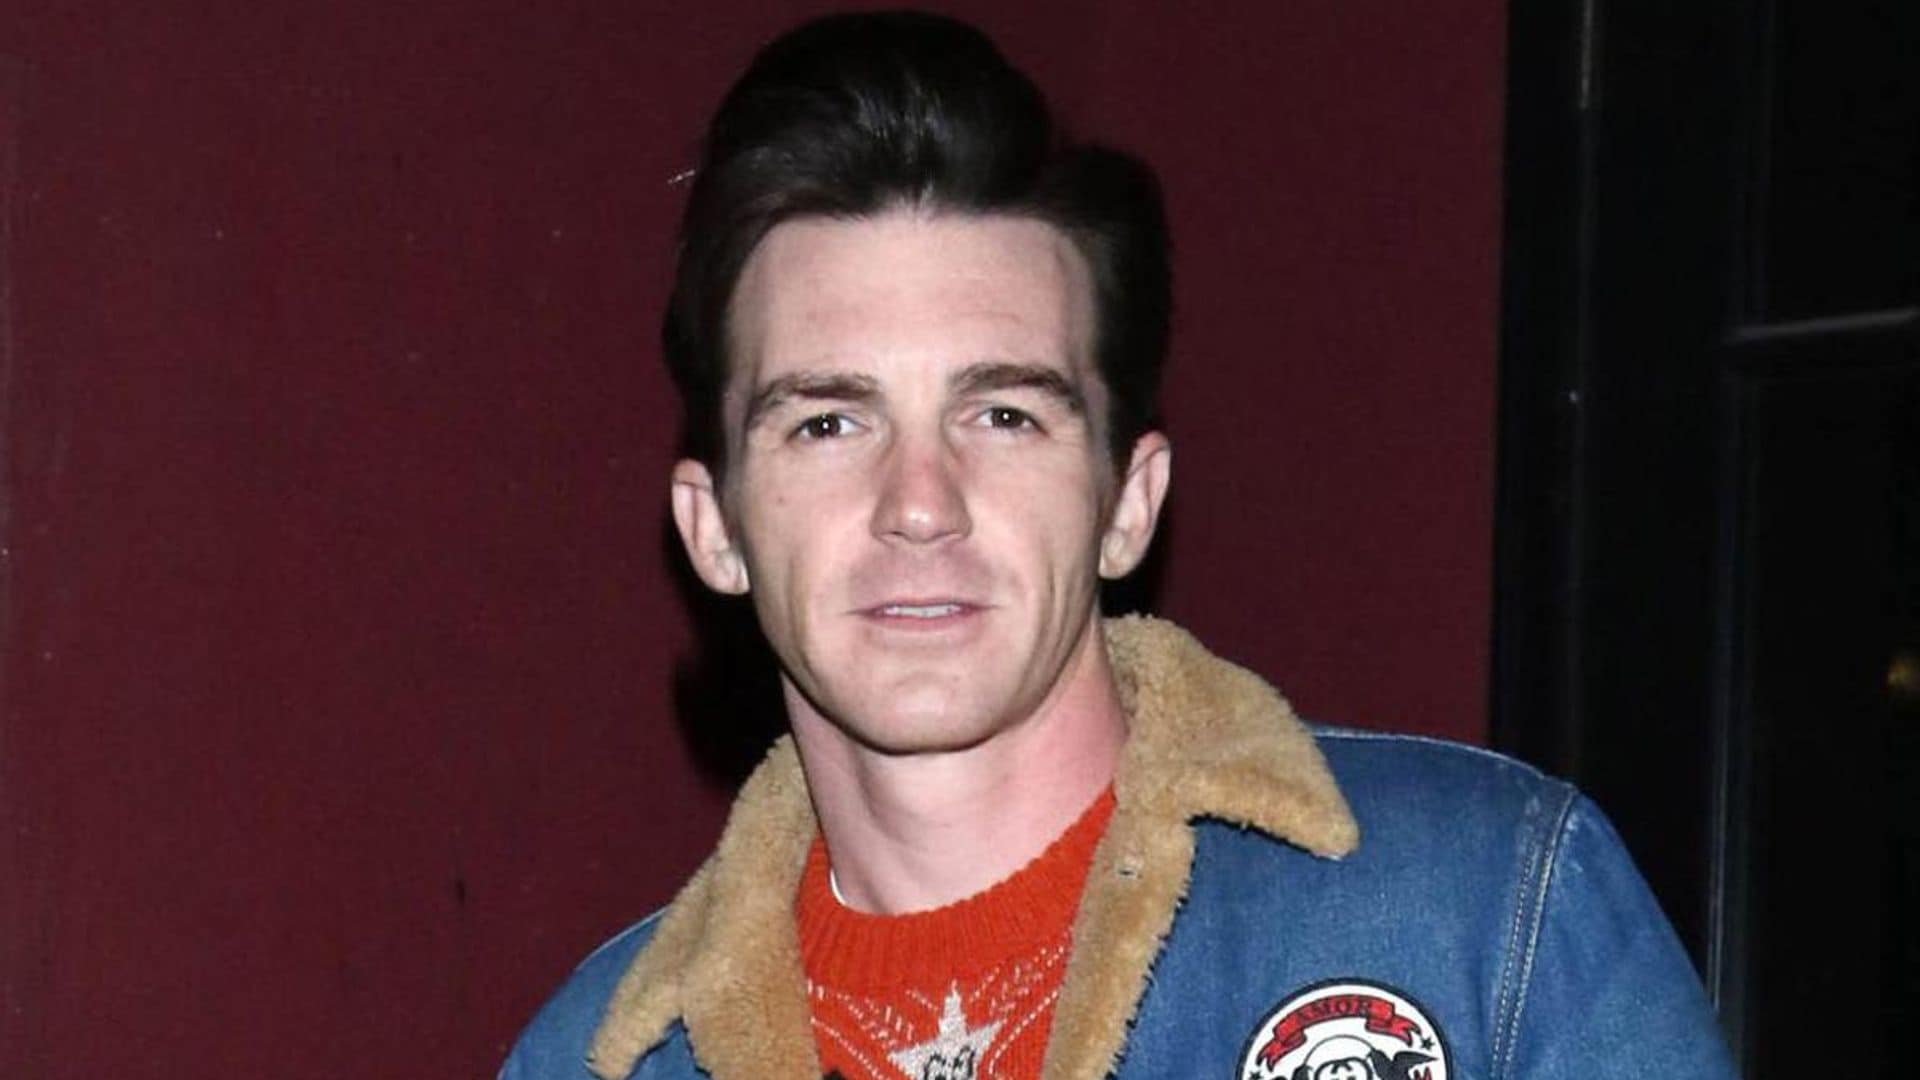 Drake Bell says he would love to move to Mexico and he has more friends there than in LA